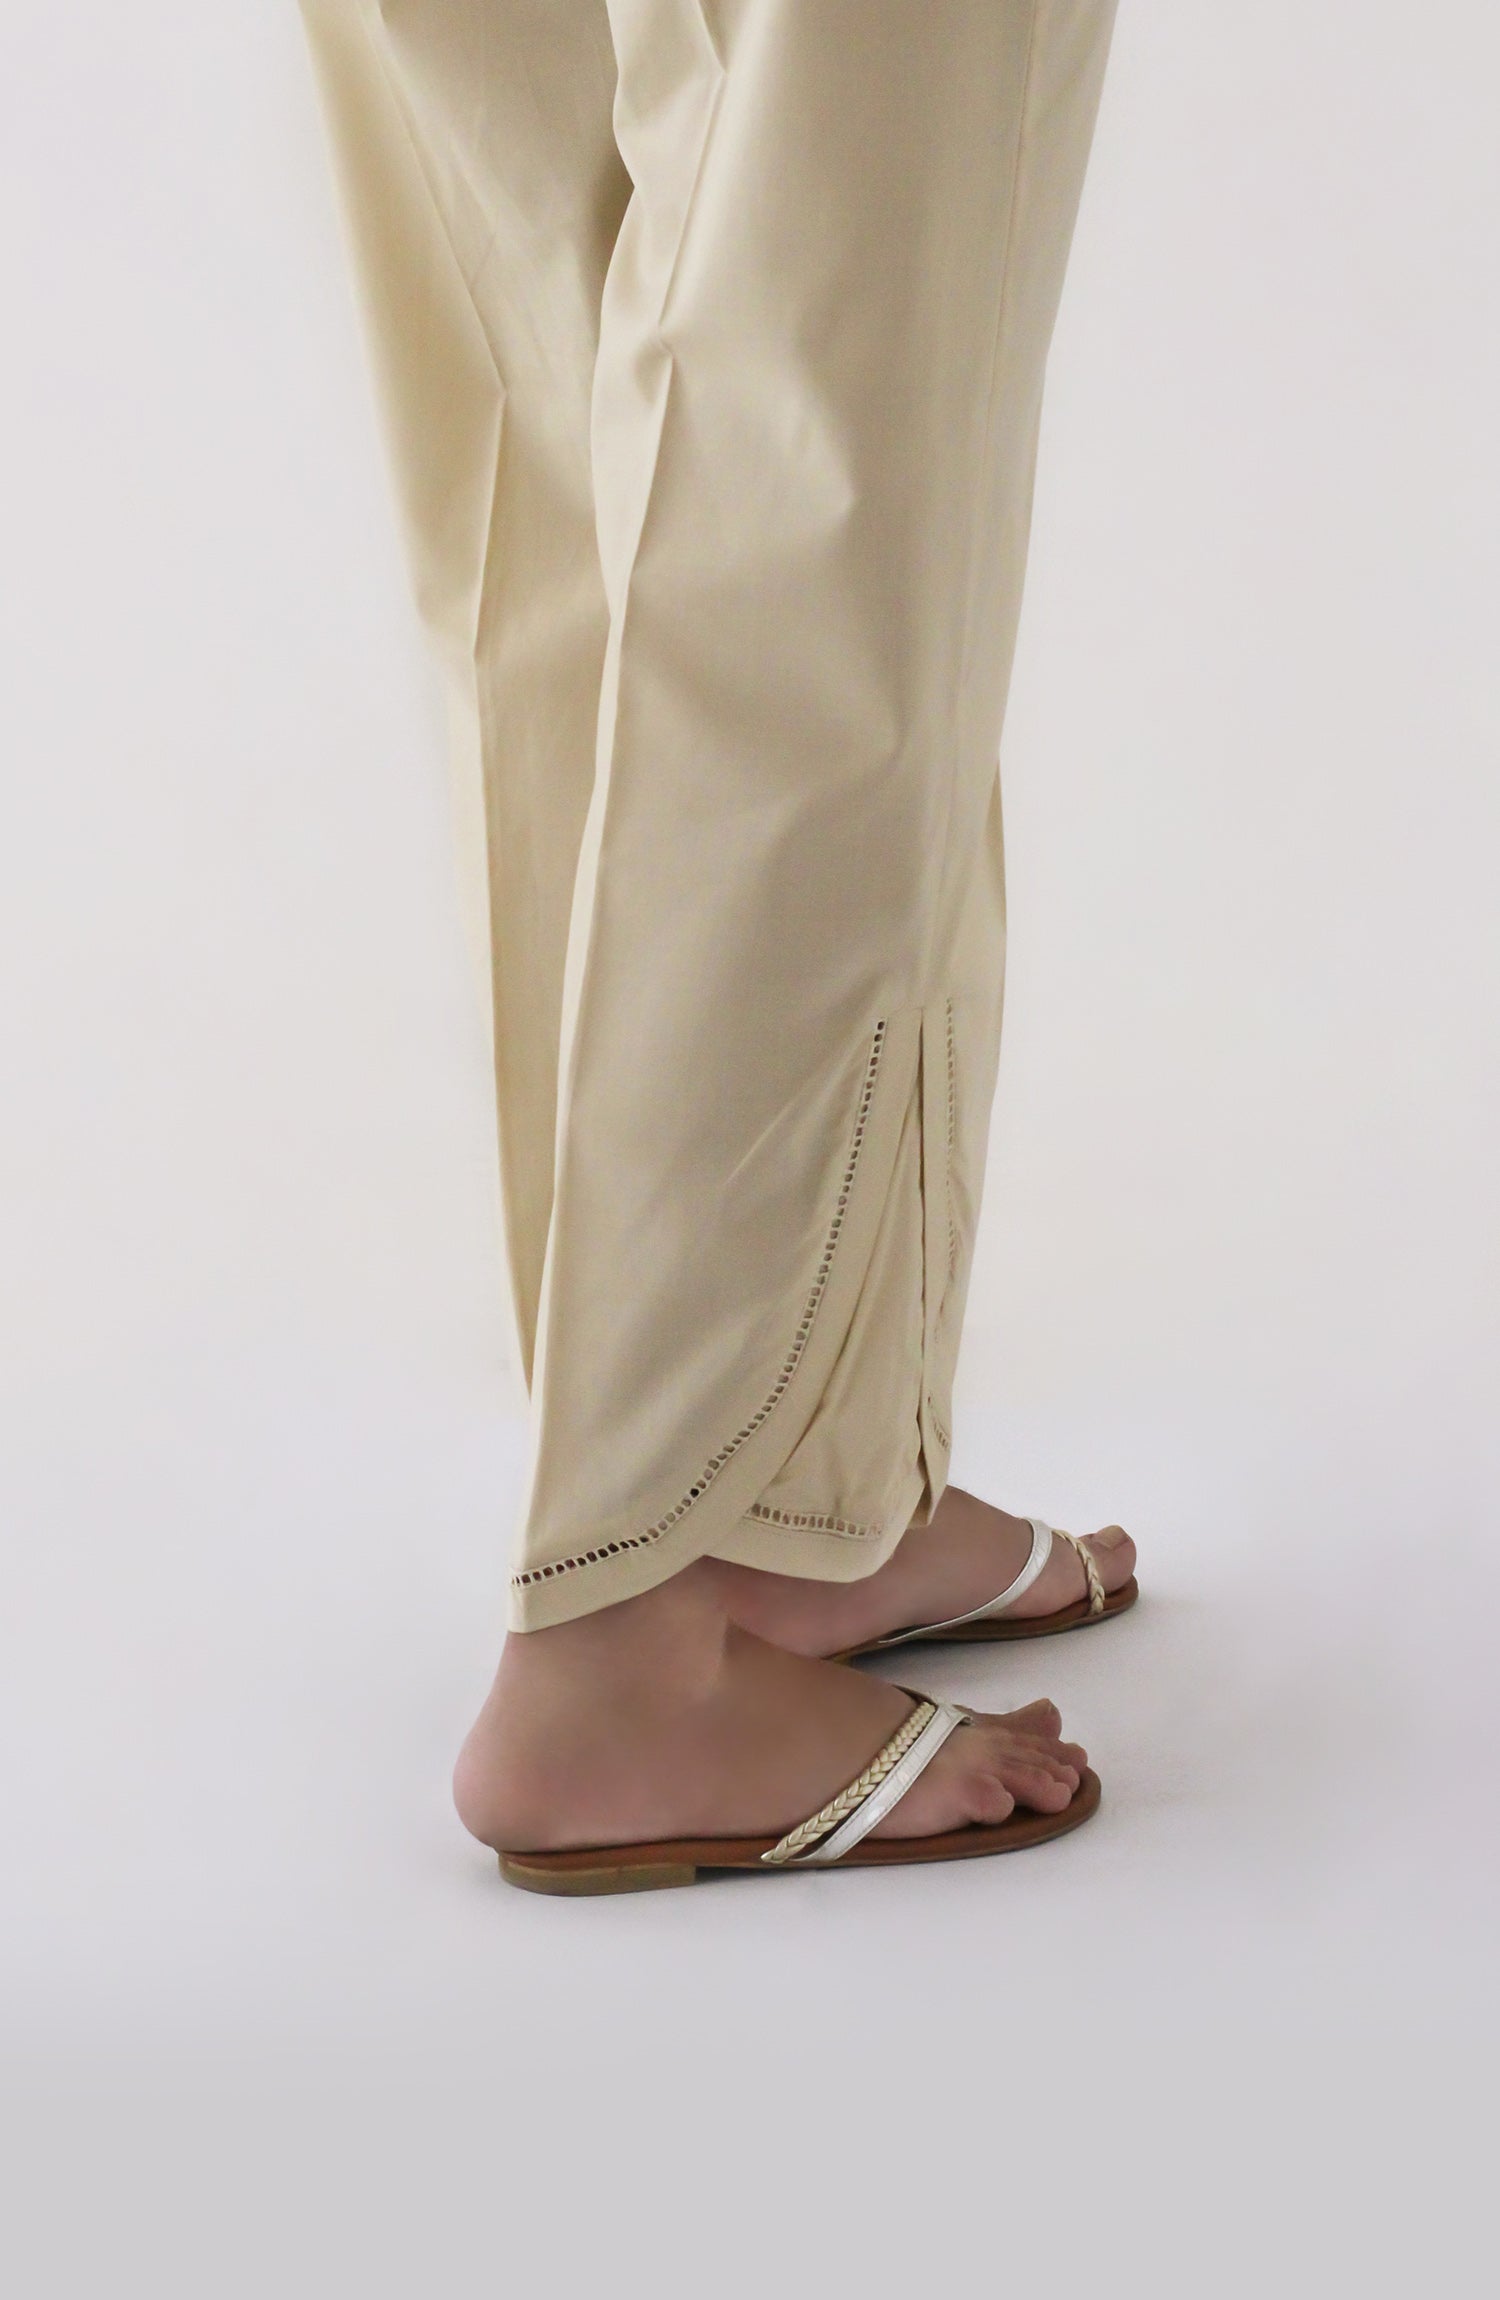 NRP-120/S BEIGE CAMBRIC SCPANTS STITCHED BOTTOMS PANTS